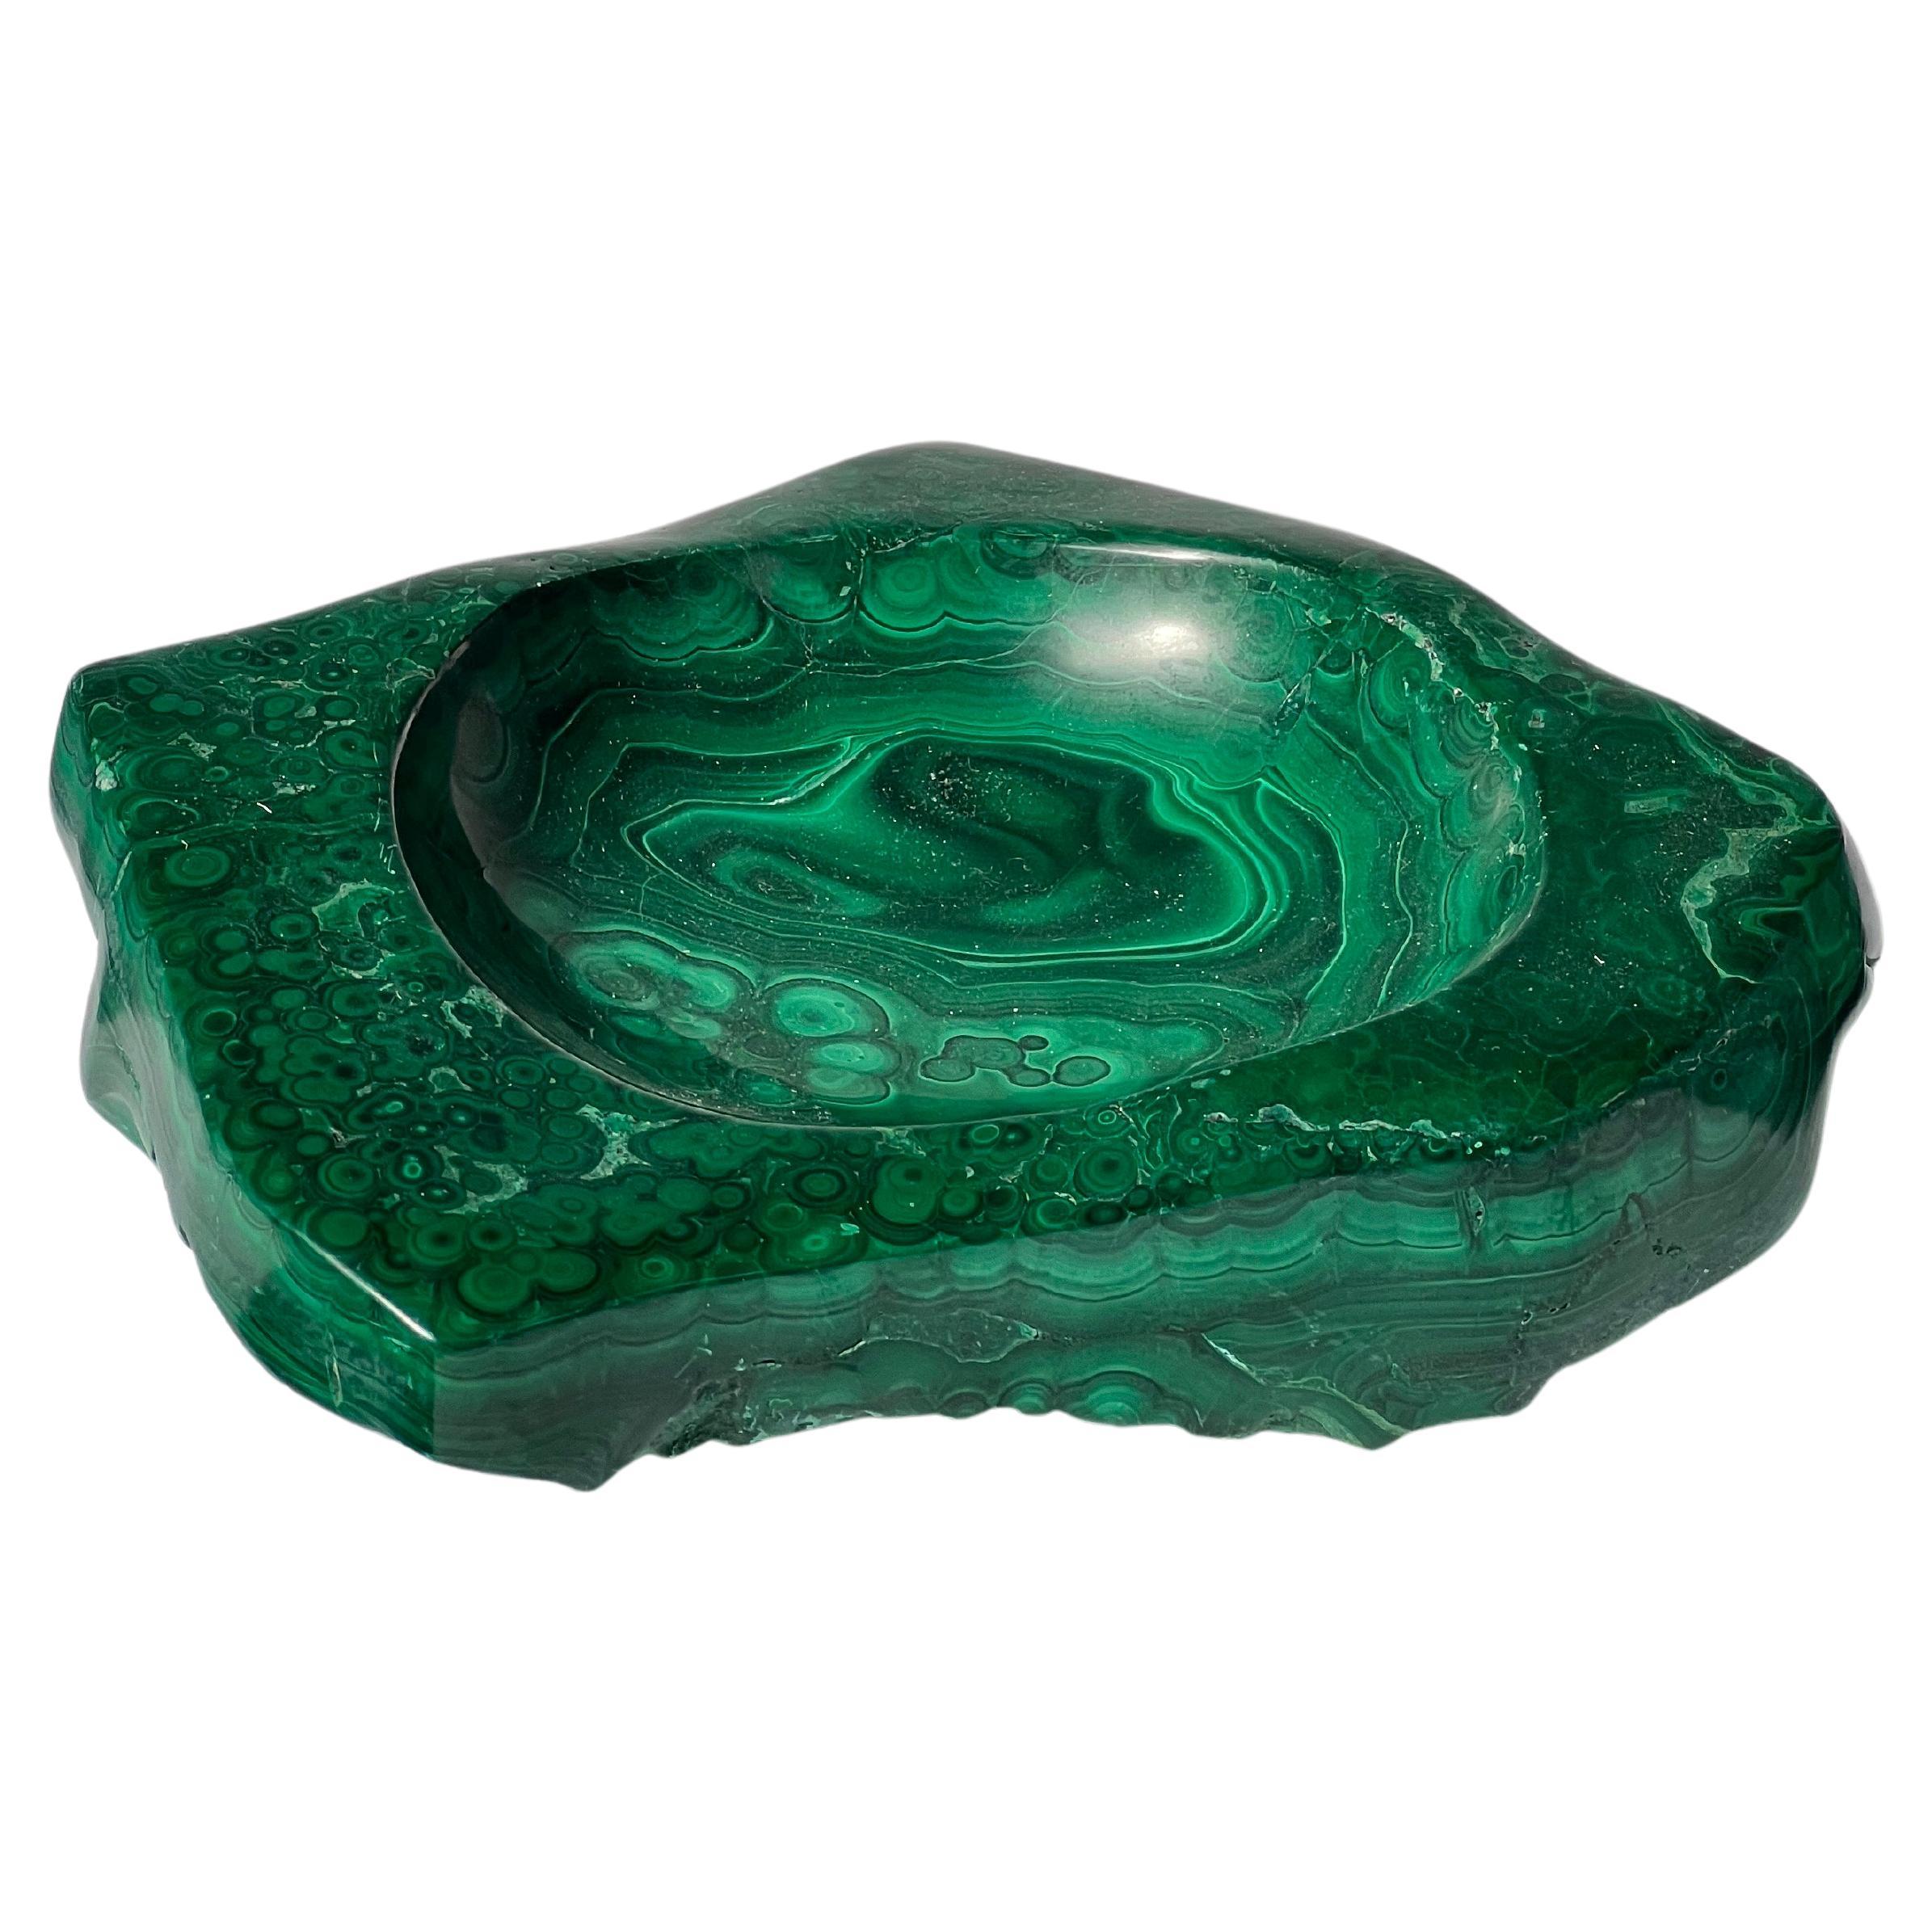 African massive malachite hand carved Ashtray natural green mineral copper